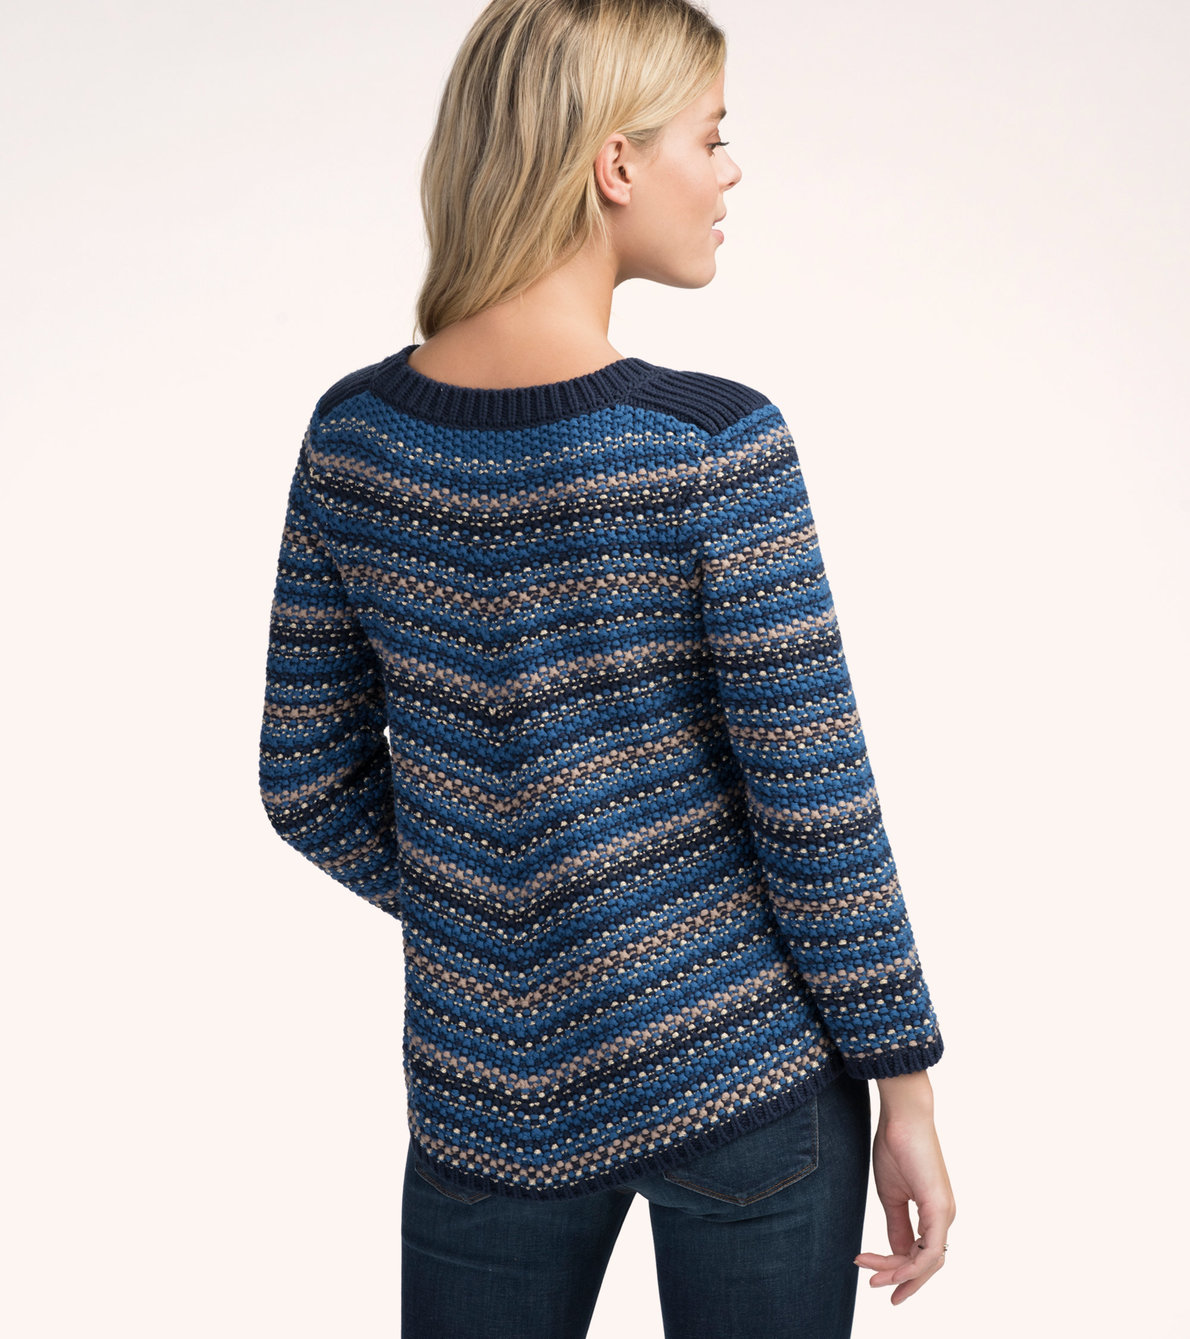 View larger image of Blue Chevron Stripes Chelsie Sweater